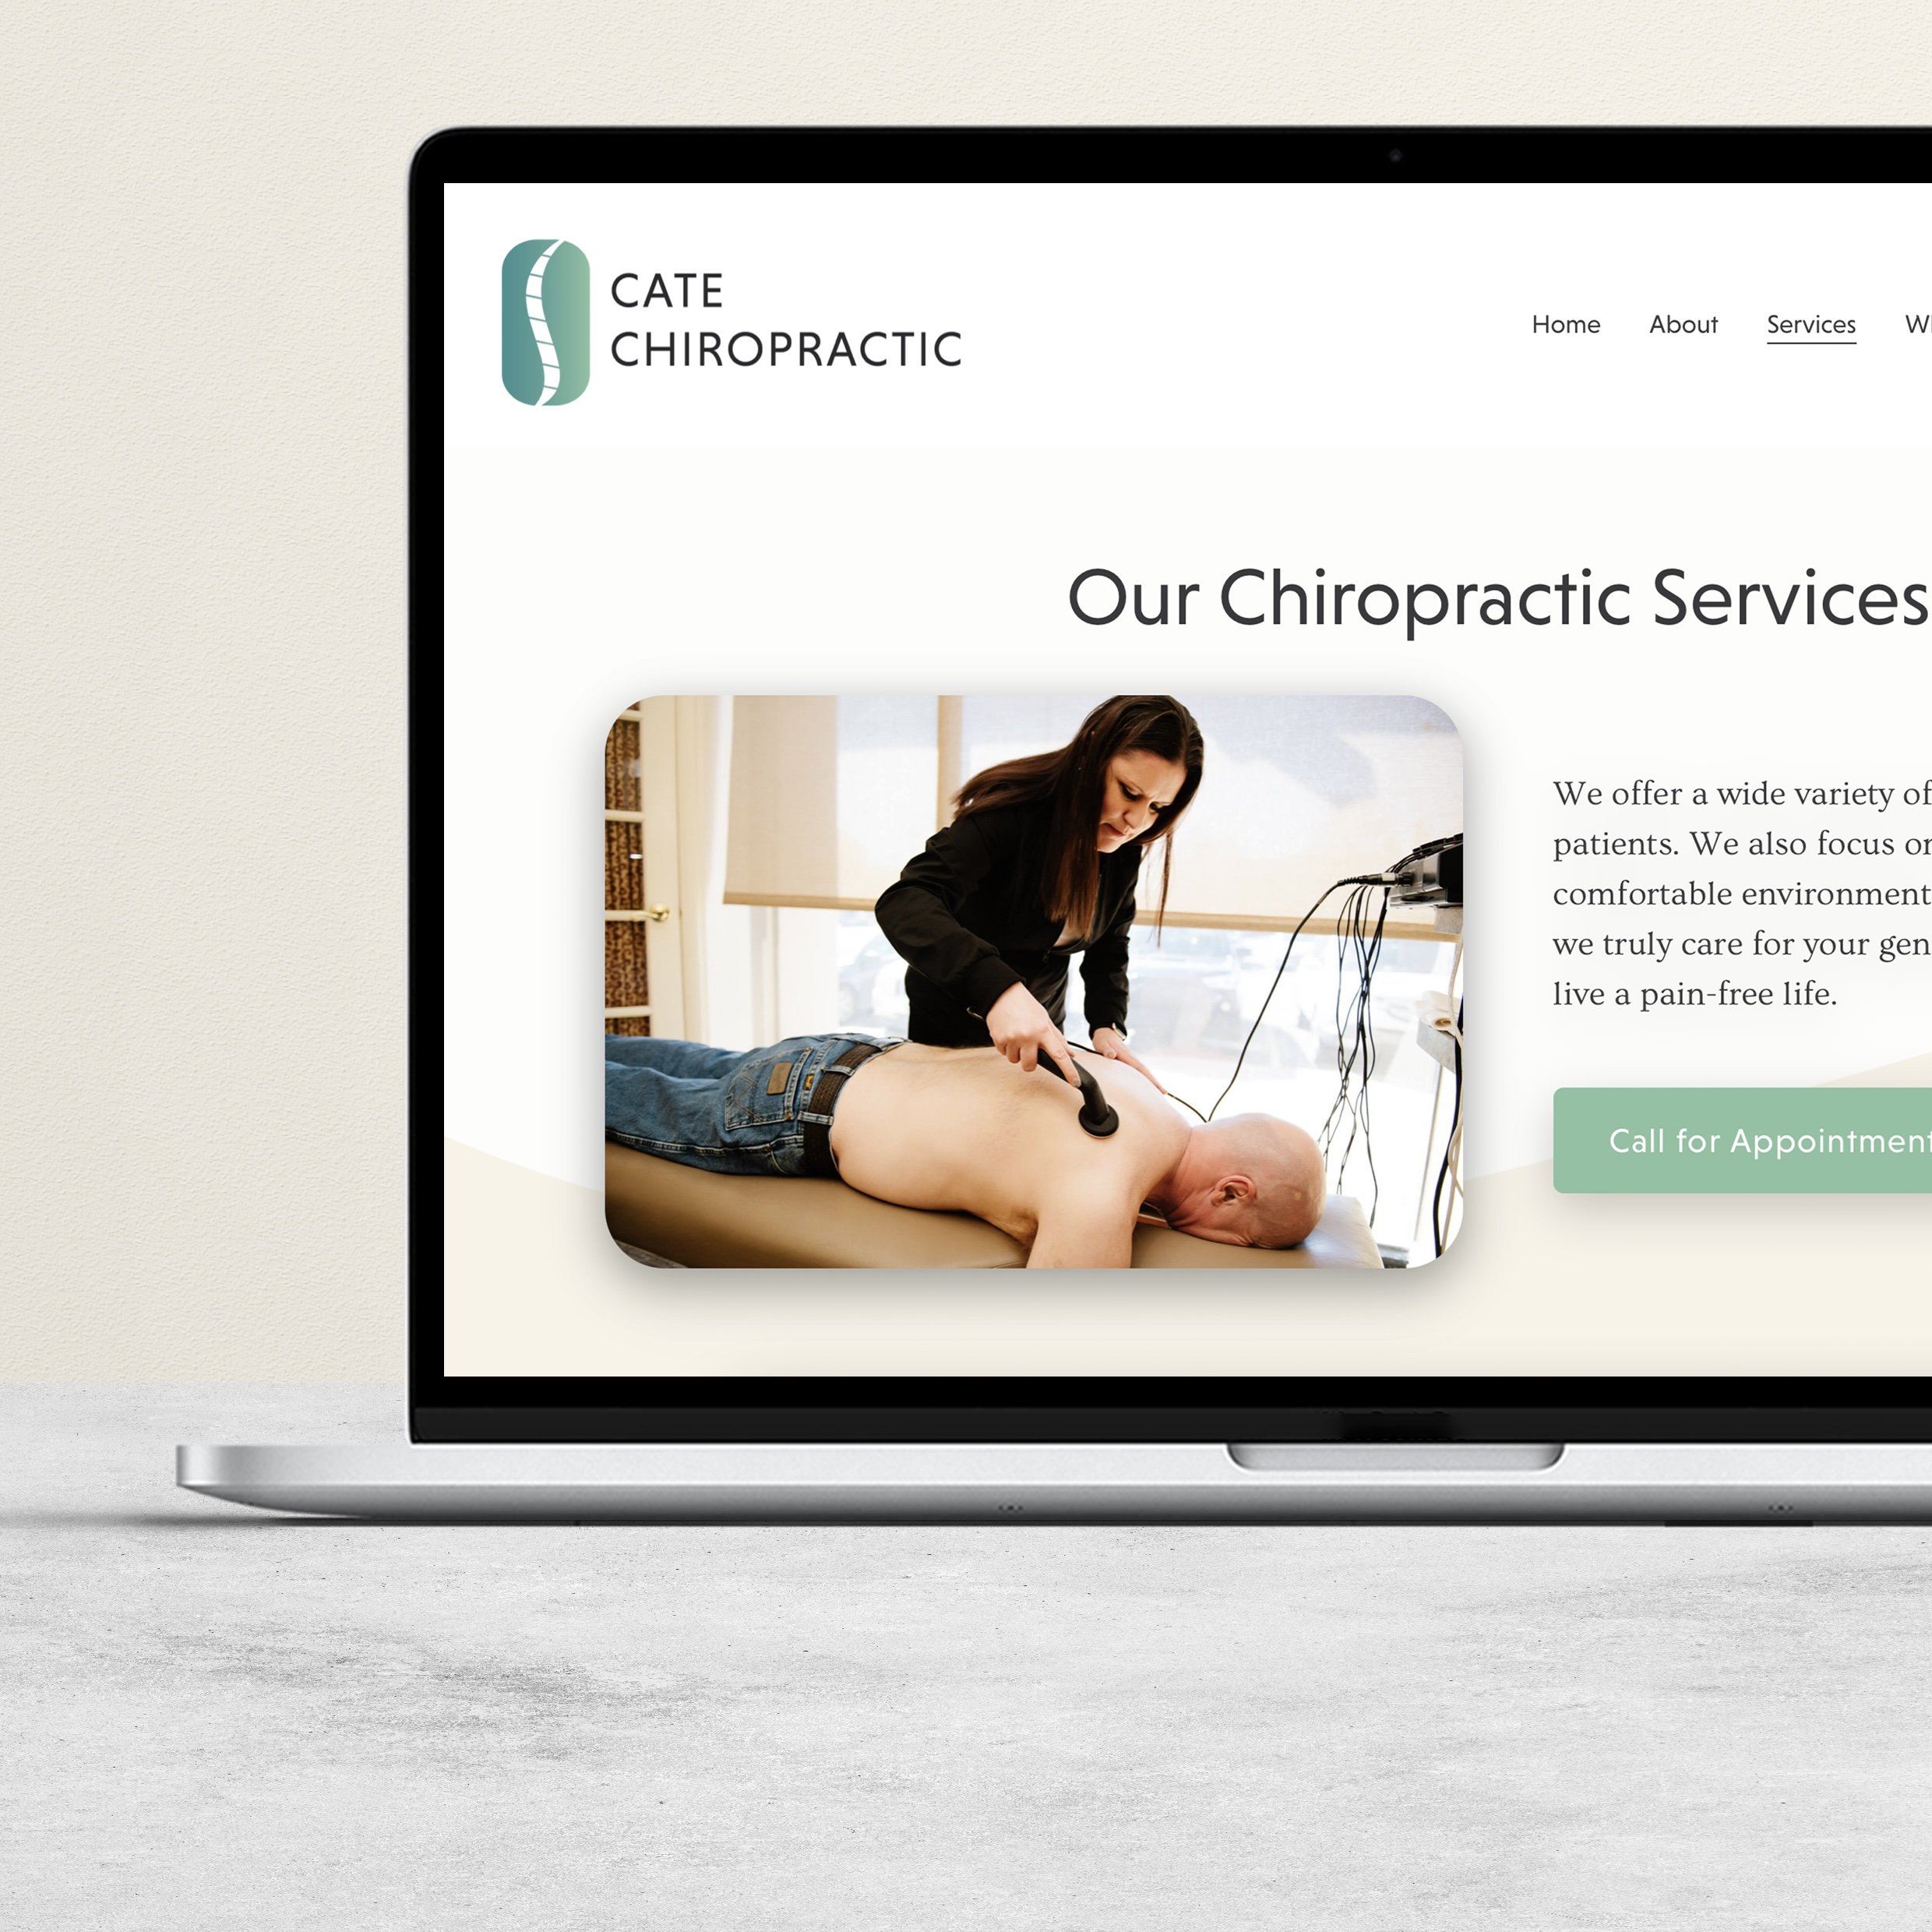 Cate-Chiropractic-Beyond-Design-Co4.jpeg